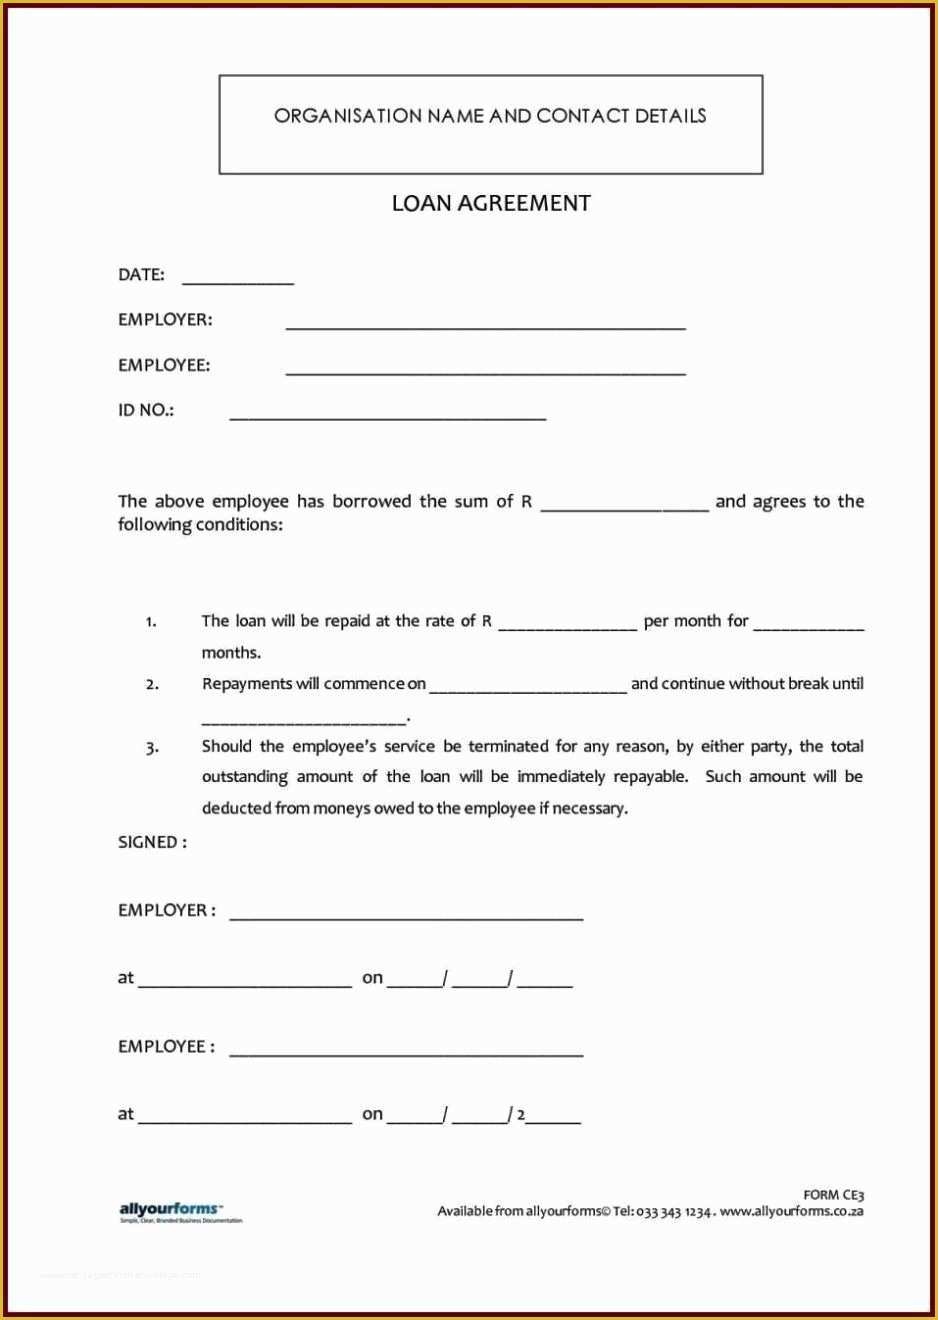 Free Template for Loan Agreement Between Friends Of Standard Loan Agreement Template Free Sampletemplatess